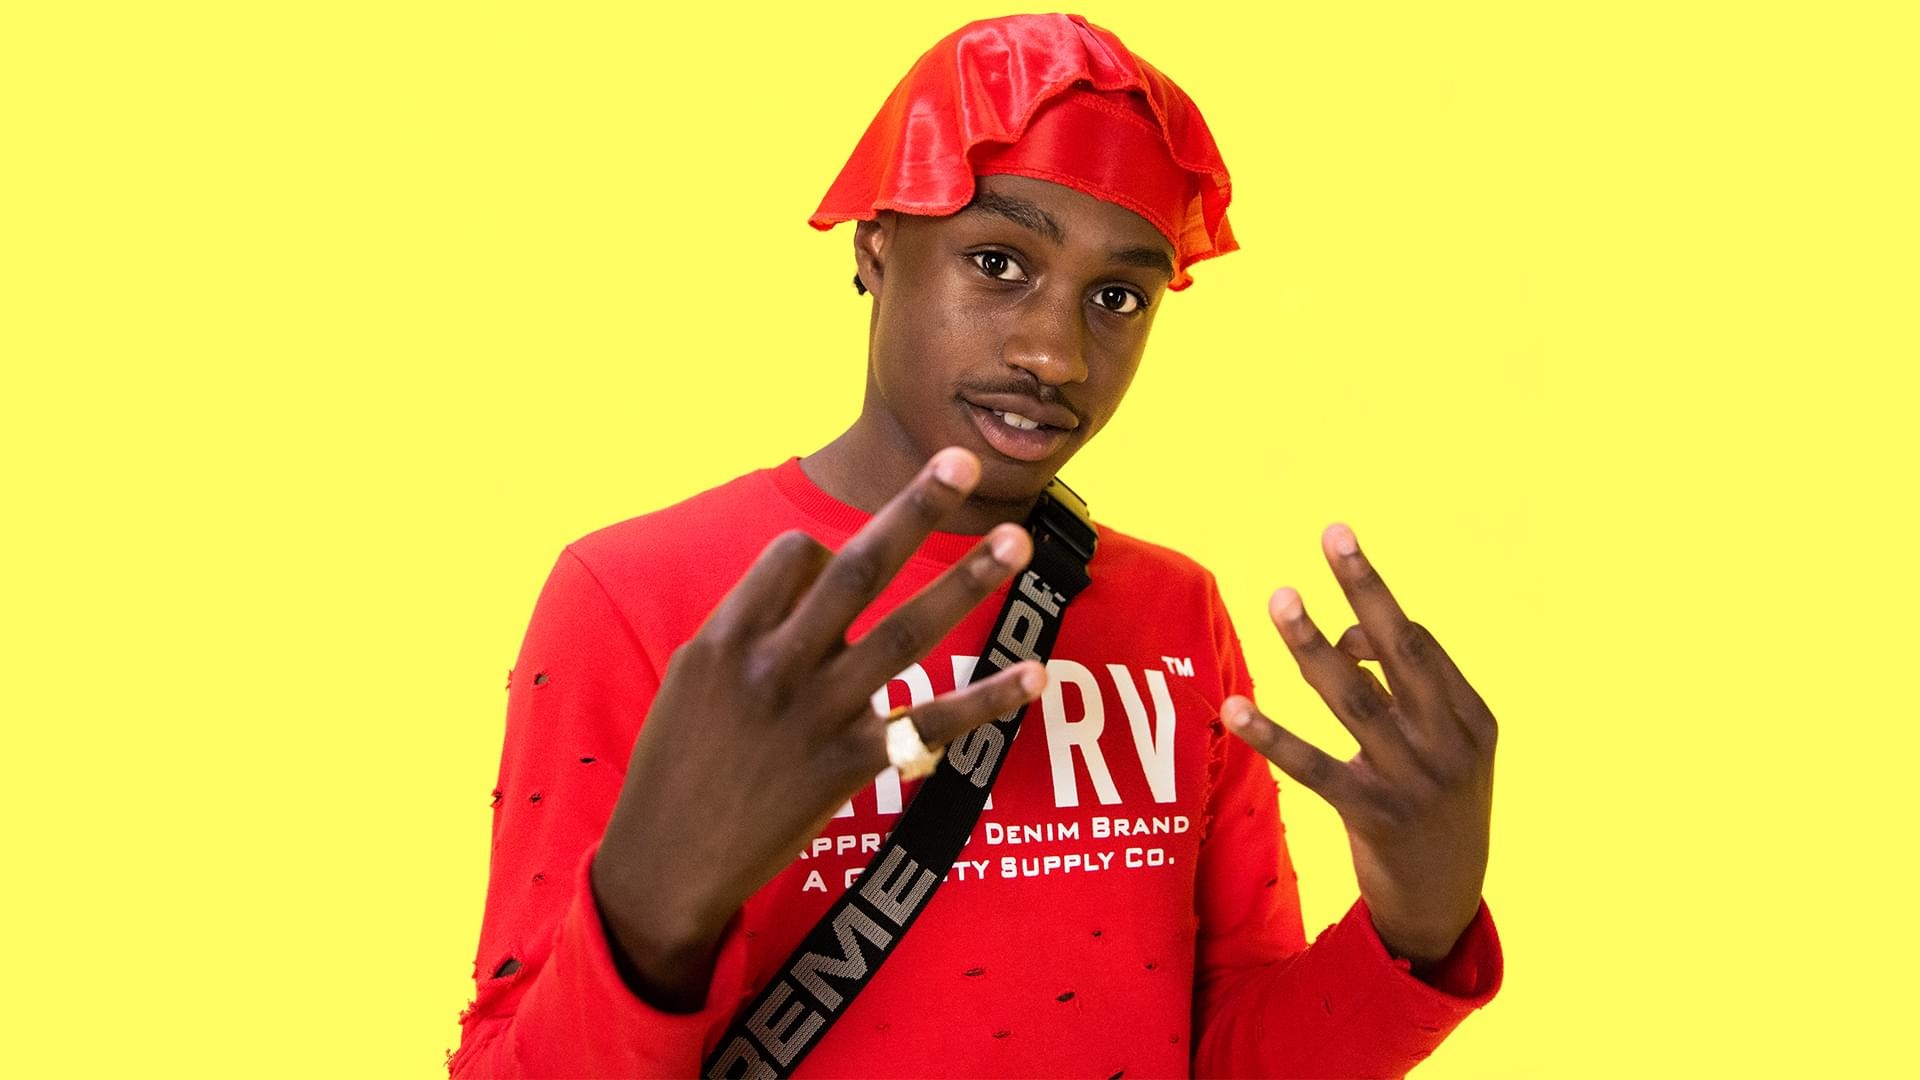 Lil Tjay Hd Wallpapers posted by Christopher Simpson 1920x1080